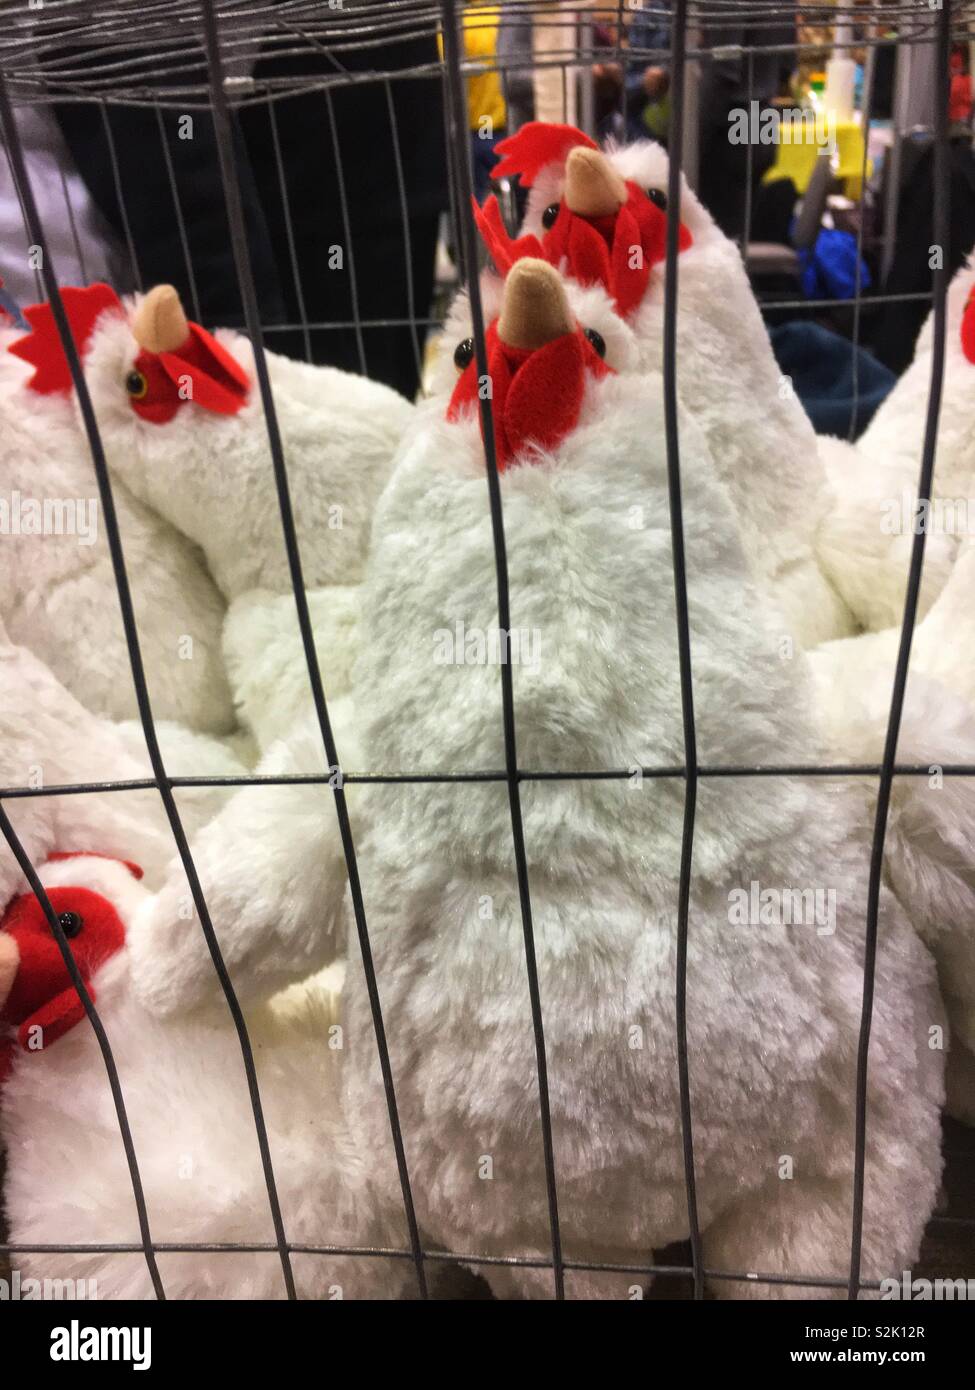 Overcrowded stuffed animal chickens standing and smushed into a wire cage that shows overcrowding of animals in cages. Stock Photo